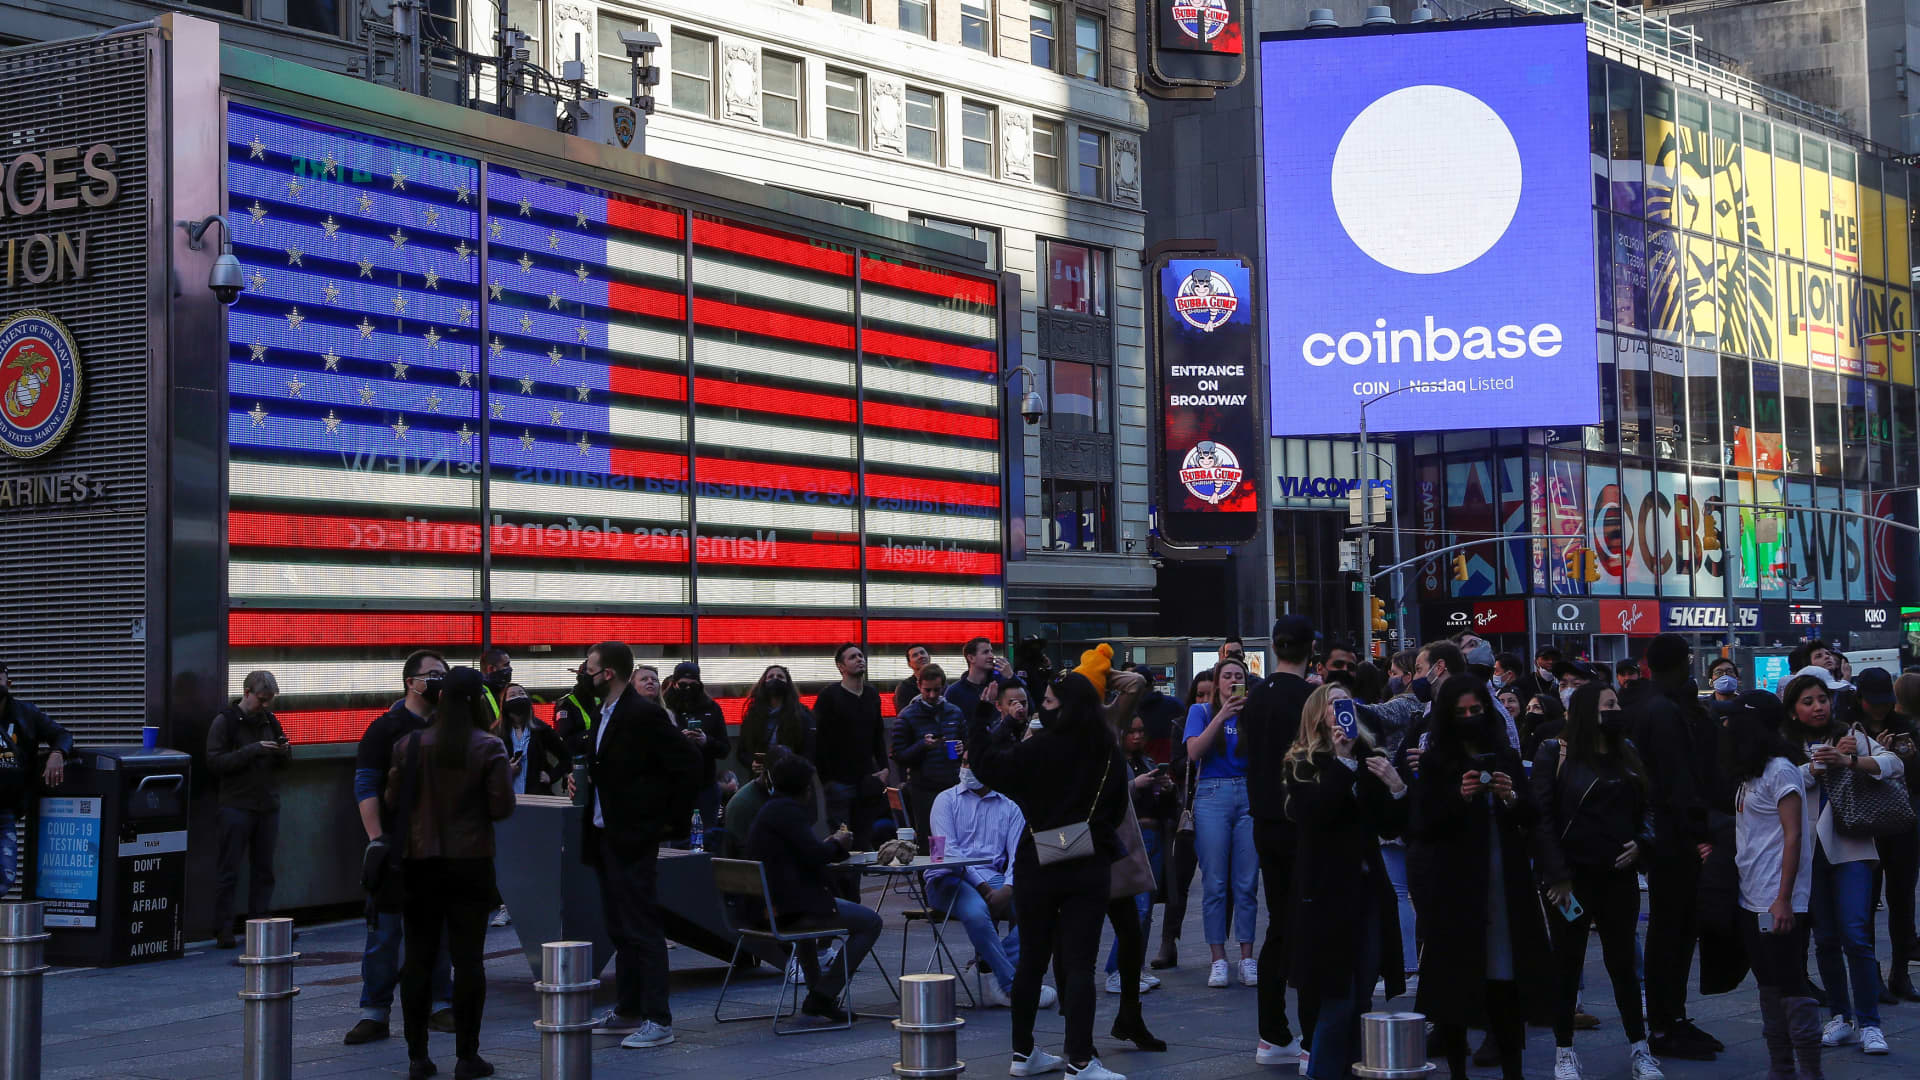 Bank of America downgrades Coinbase, says FTX collapse raises ‘contagion risk’ for crypto platform